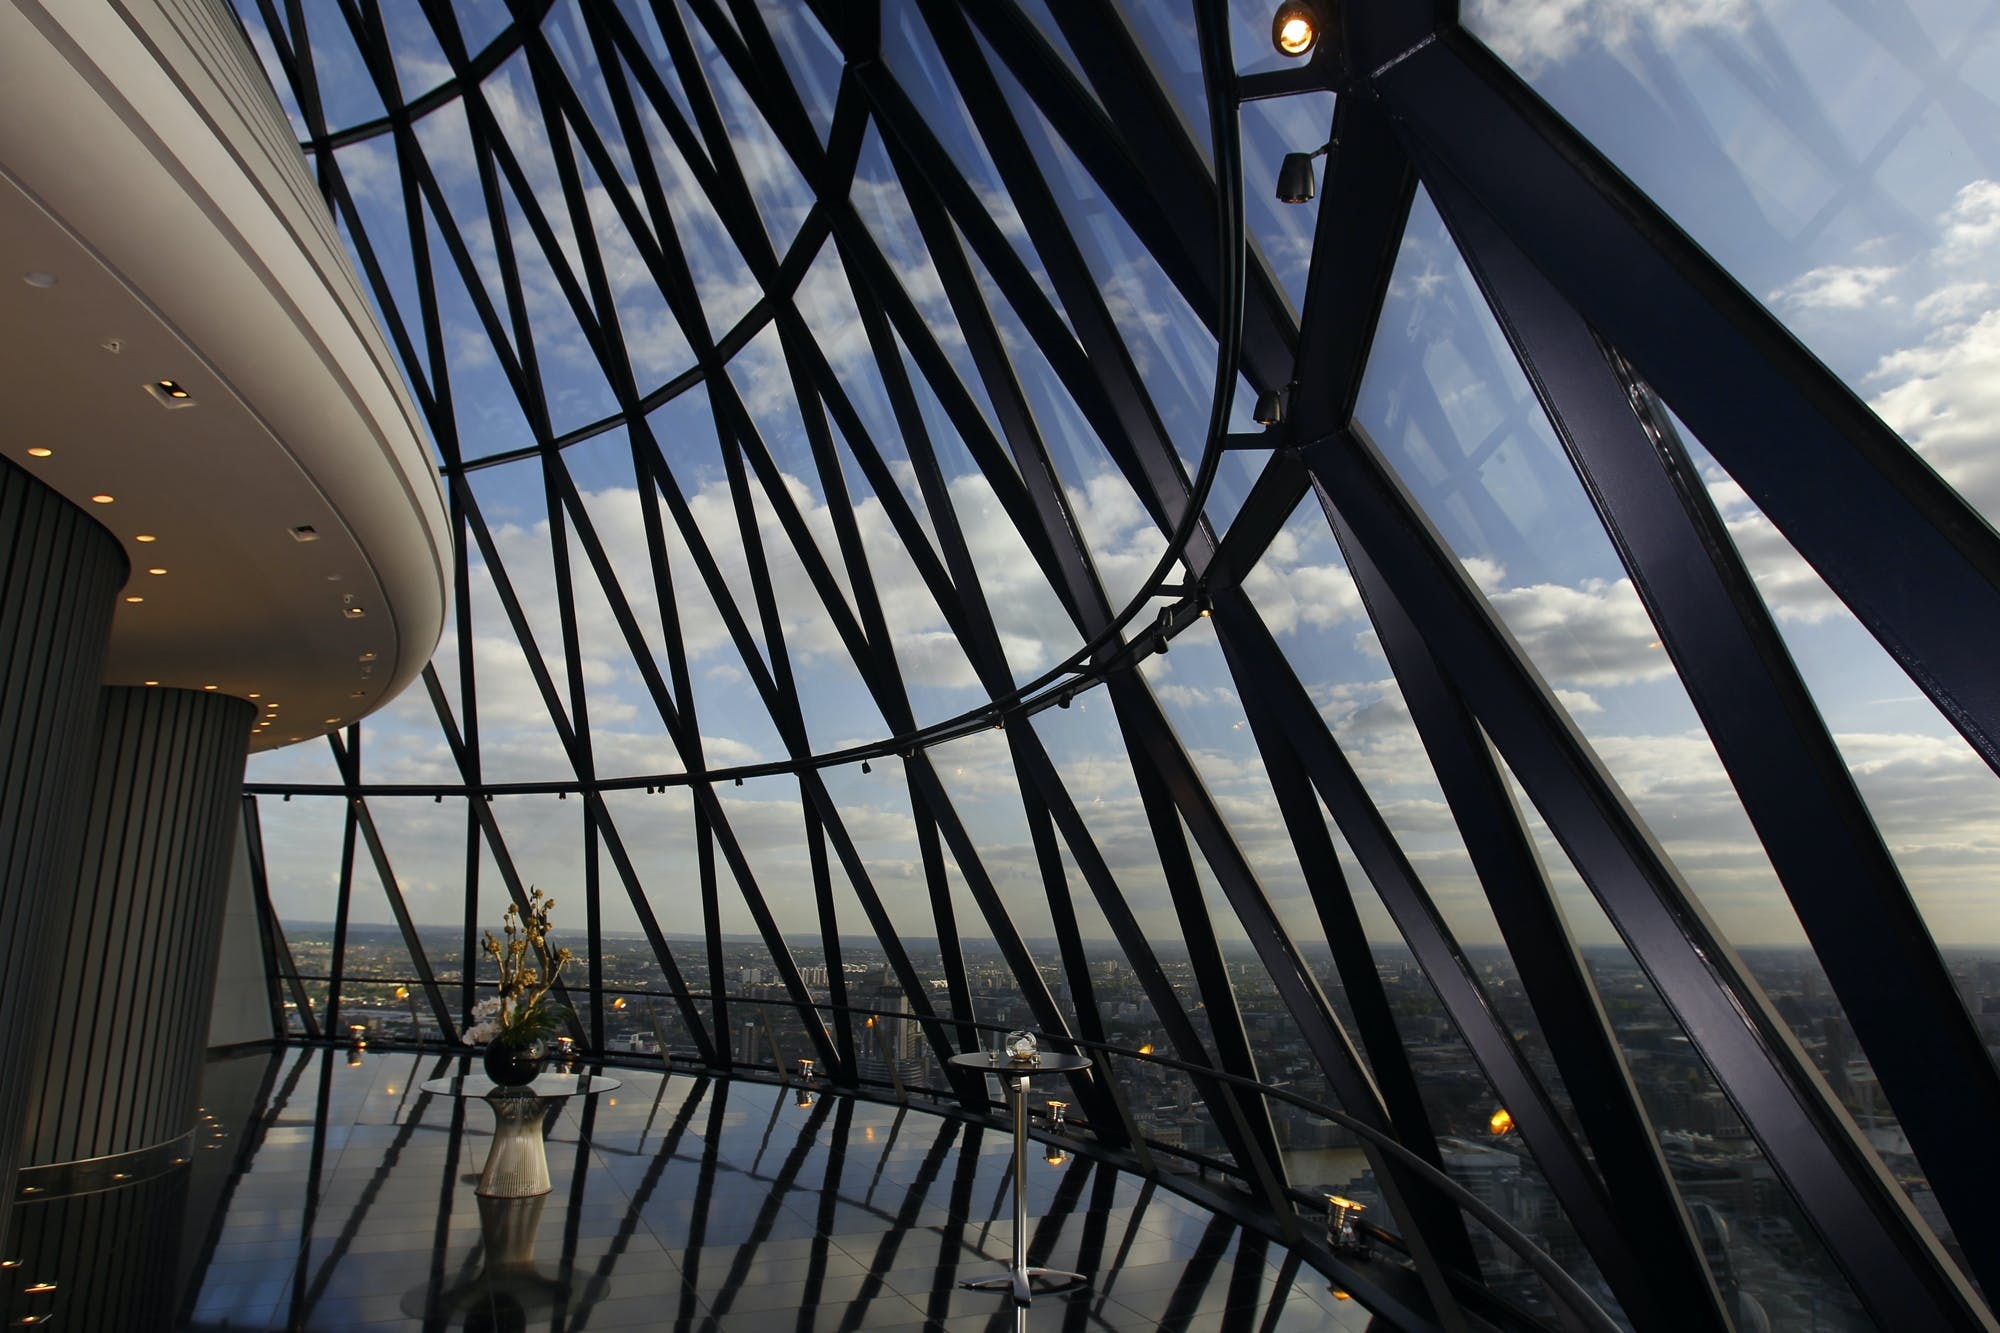 Wedding with a view, Gherkin events hire, Searcysthe Gherkin, Events hire, 2000x1340 HD Desktop